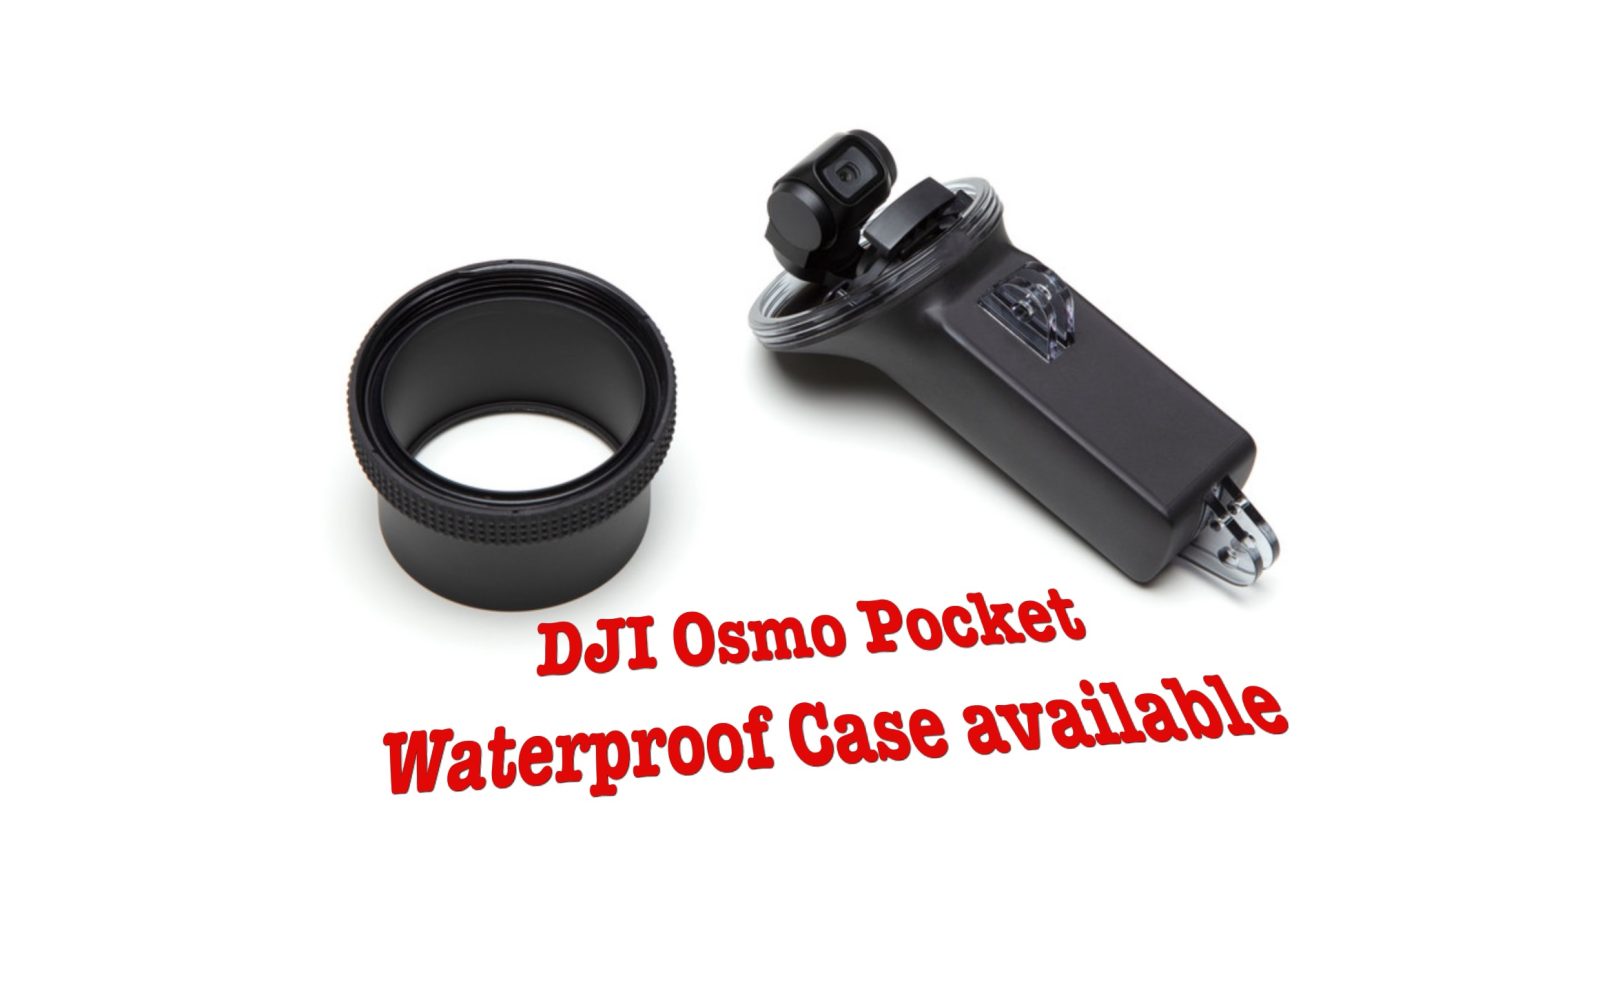 DJI Osmo Pocket Waterproof case and other accessories now available